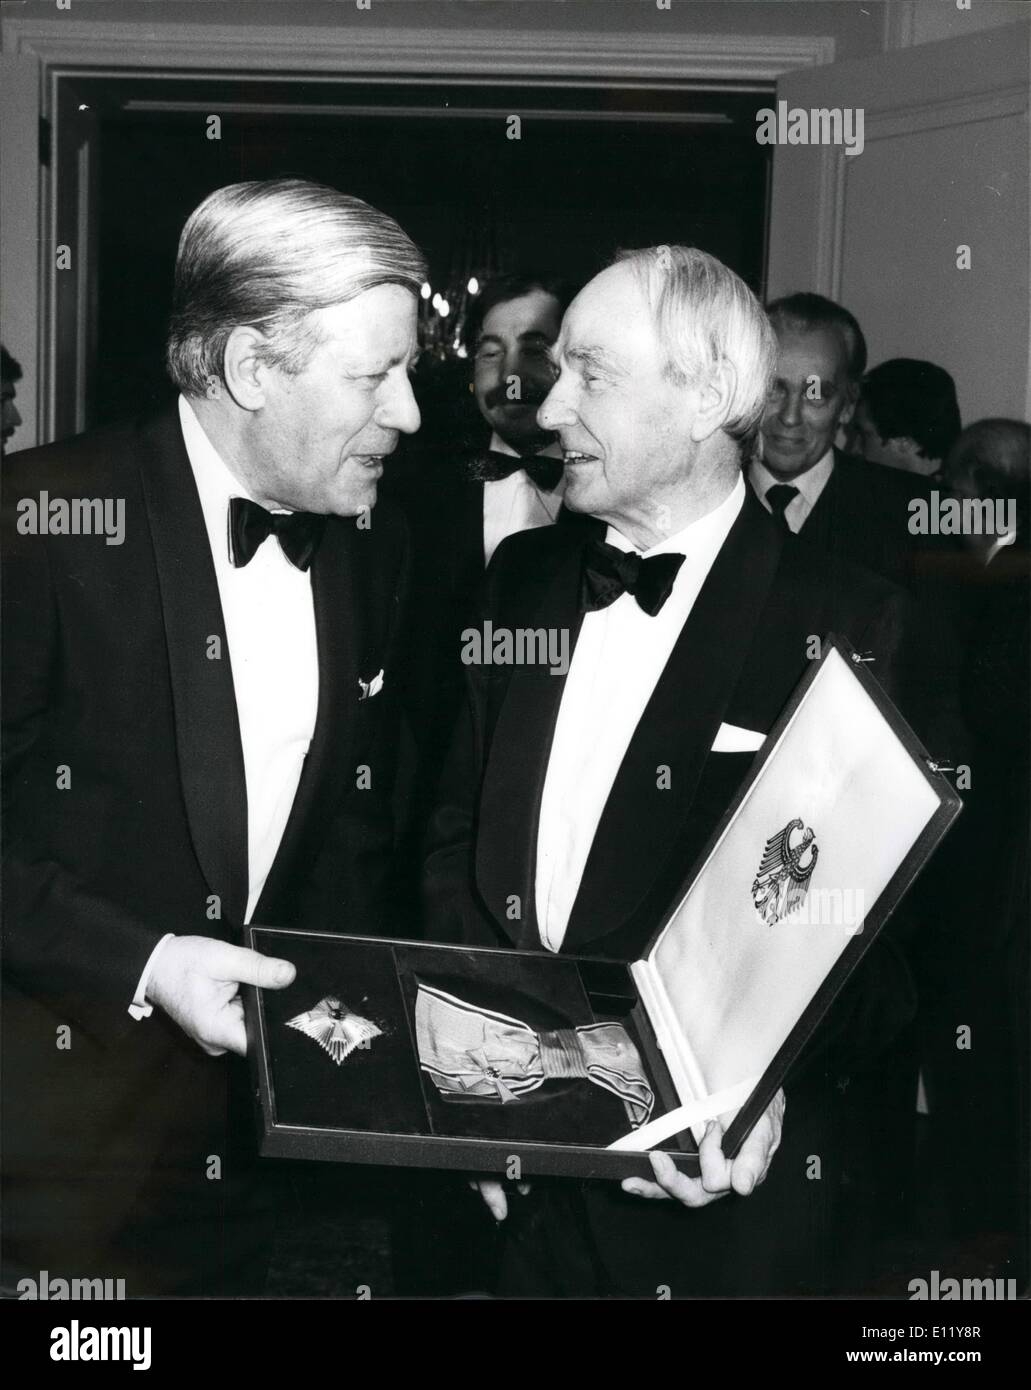 Dec. 12, 1980 - Germans Honour Henry Moore: Sculptor Henry Moore, 82, received the Grand Cross of the Order of Merit of the Federal Republic of Germany at a ceremony in the in the Embassy in Belgrave Square, London last night. Helmet Schmidt, the West German Chancellor presented it to him. He has becomes one of the world's most renowned sculptors, and his work is on show in very continent. A number of his major works are in West Germany, where he is regarded as a ''popular'' artist in the best sense Stock Photo